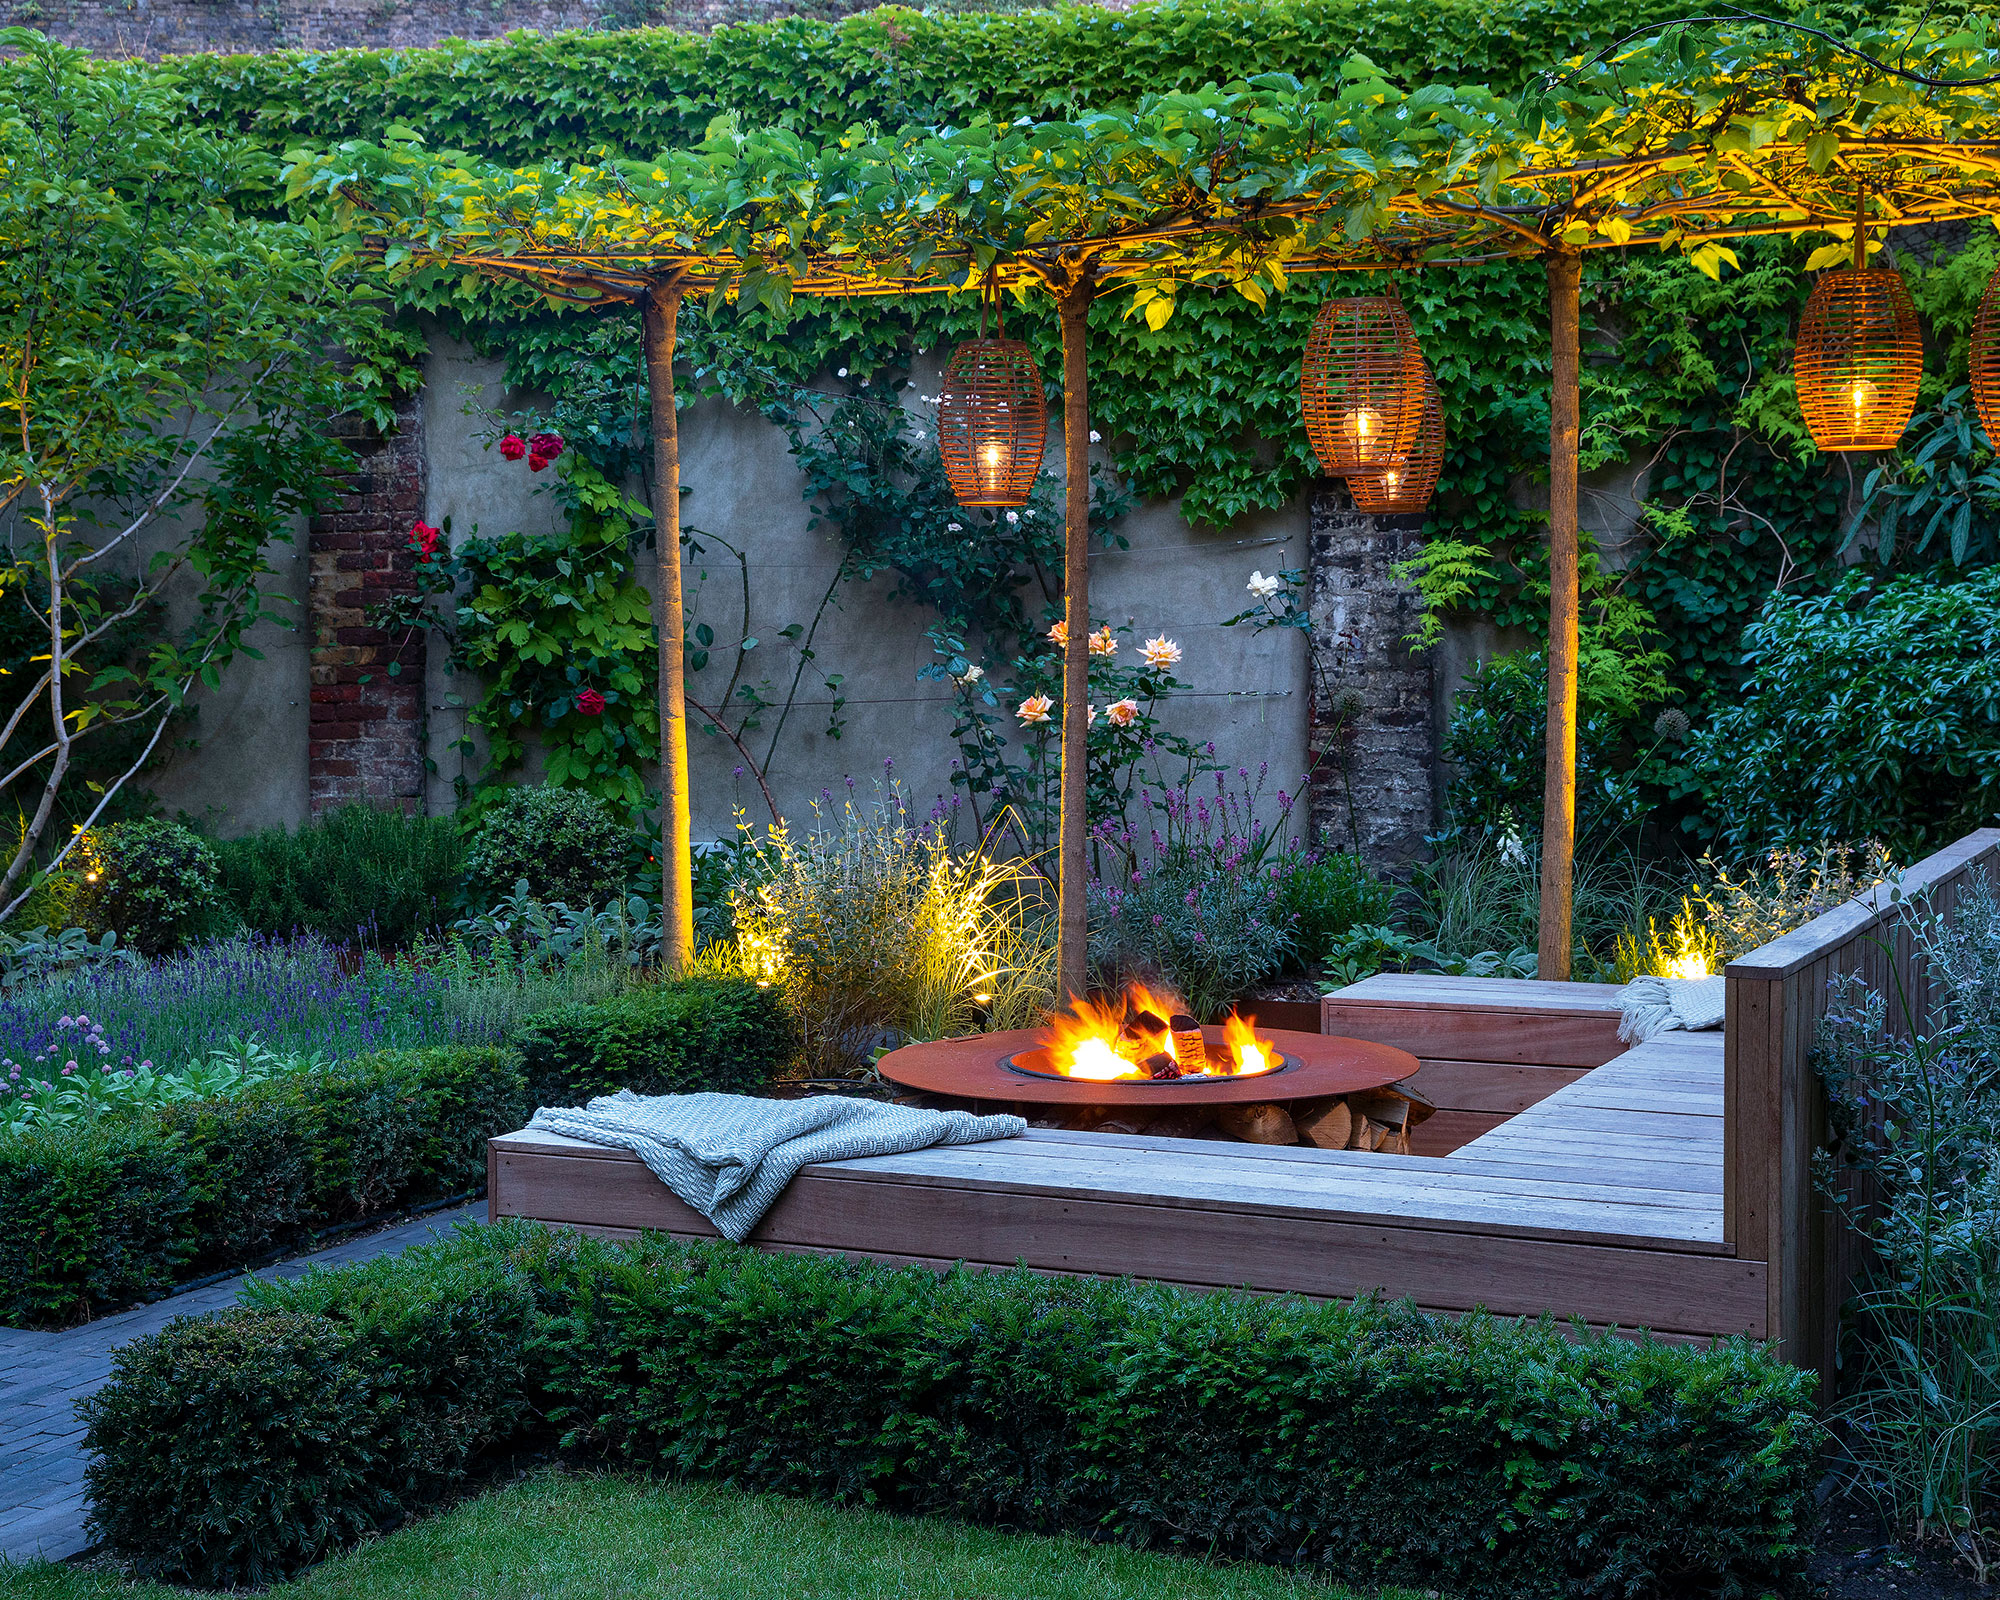 Cozy garden with garden lights and hanging lanterns and firepit